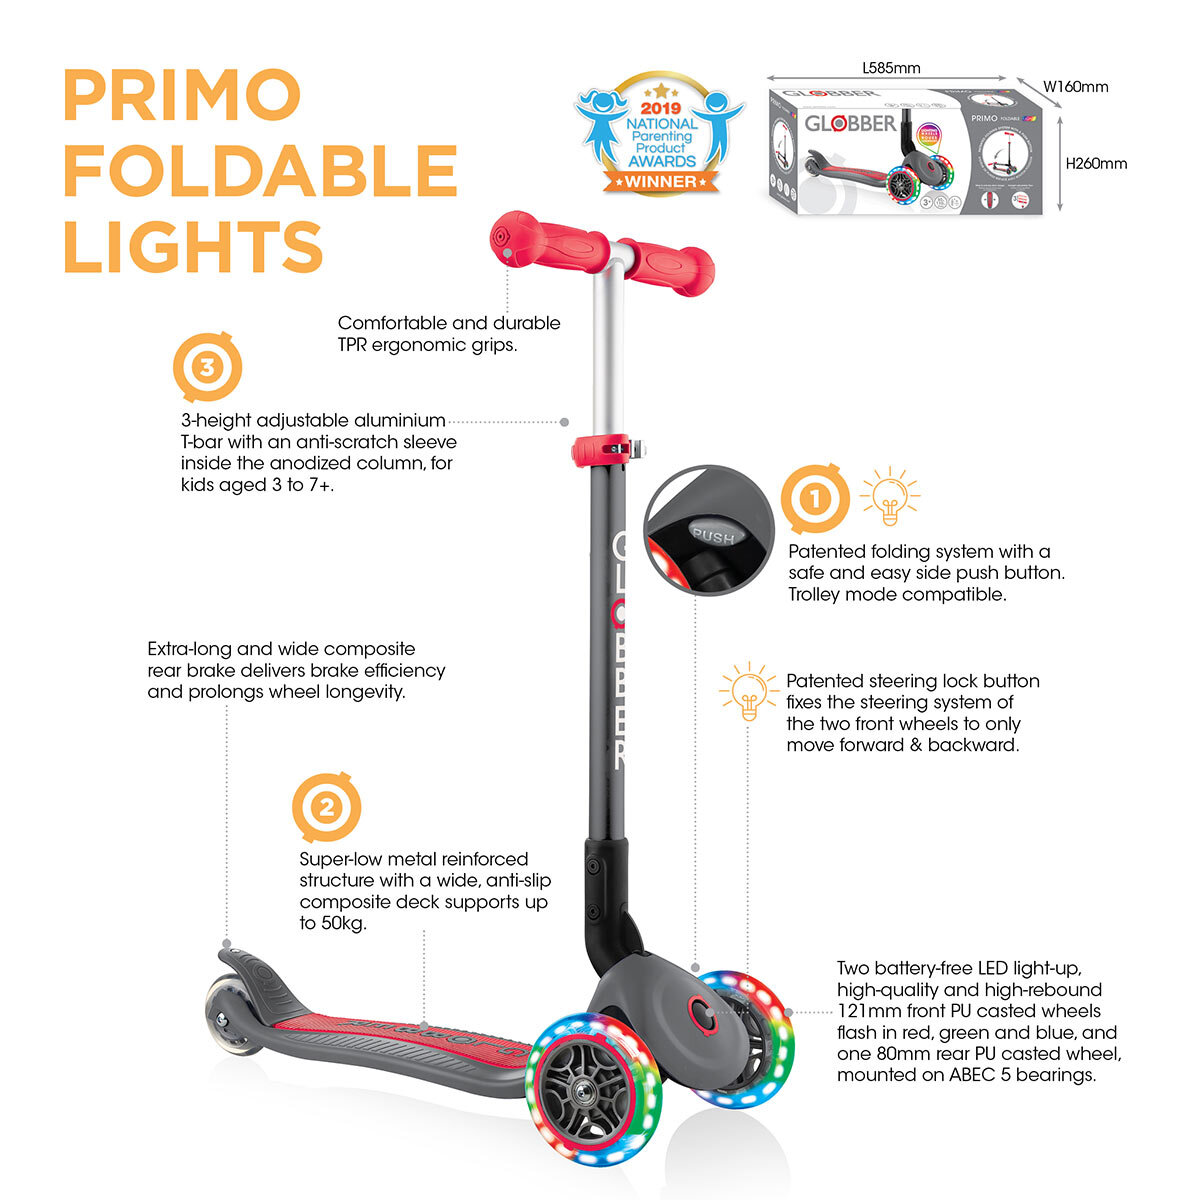 Buy Globber Primo Lights Scooter in Sky Blue 7 Image at Costco.co.uk